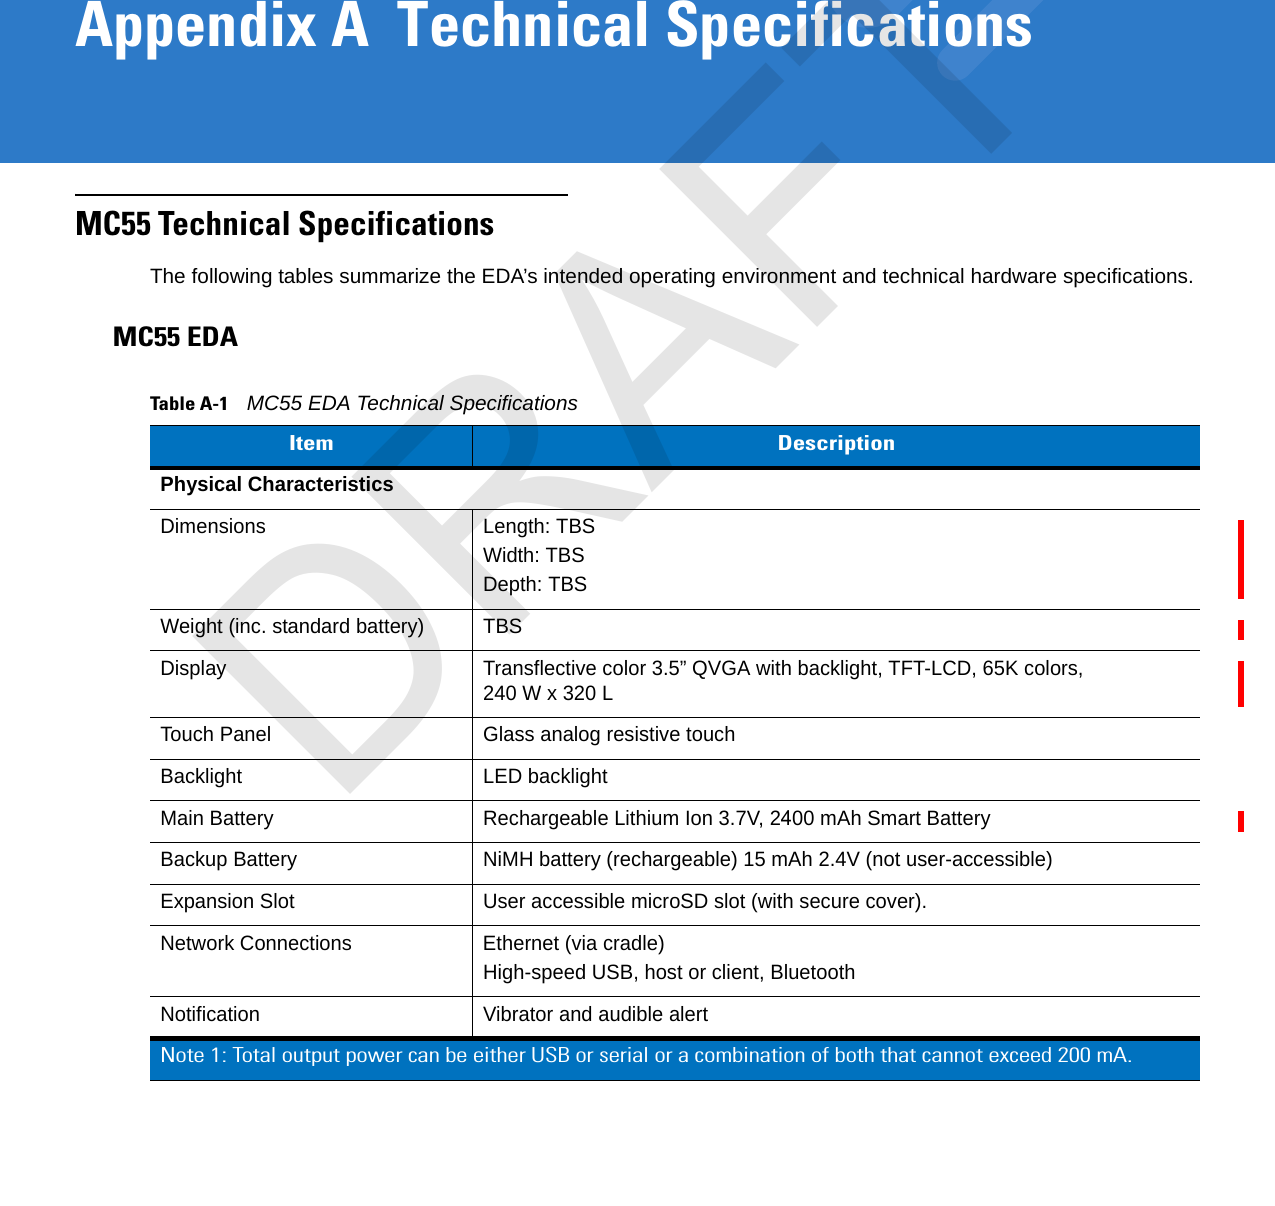 Appendix A  Technical SpecificationsMC55 Technical SpecificationsThe following tables summarize the EDA’s intended operating environment and technical hardware specifications.MC55 EDATable A-1    MC55 EDA Technical SpecificationsItem DescriptionPhysical CharacteristicsDimensions Length: TBSWidth: TBSDepth: TBSWeight (inc. standard battery) TBSDisplay Transflective color 3.5” QVGA with backlight, TFT-LCD, 65K colors, 240 W x 320 LTouch Panel Glass analog resistive touchBacklight LED backlightMain Battery Rechargeable Lithium Ion 3.7V, 2400 mAh Smart BatteryBackup Battery NiMH battery (rechargeable) 15 mAh 2.4V (not user-accessible)Expansion Slot User accessible microSD slot (with secure cover).Network Connections Ethernet (via cradle)High-speed USB, host or client, BluetoothNotification Vibrator and audible alertNote 1: Total output power can be either USB or serial or a combination of both that cannot exceed 200 mA.DRAFT